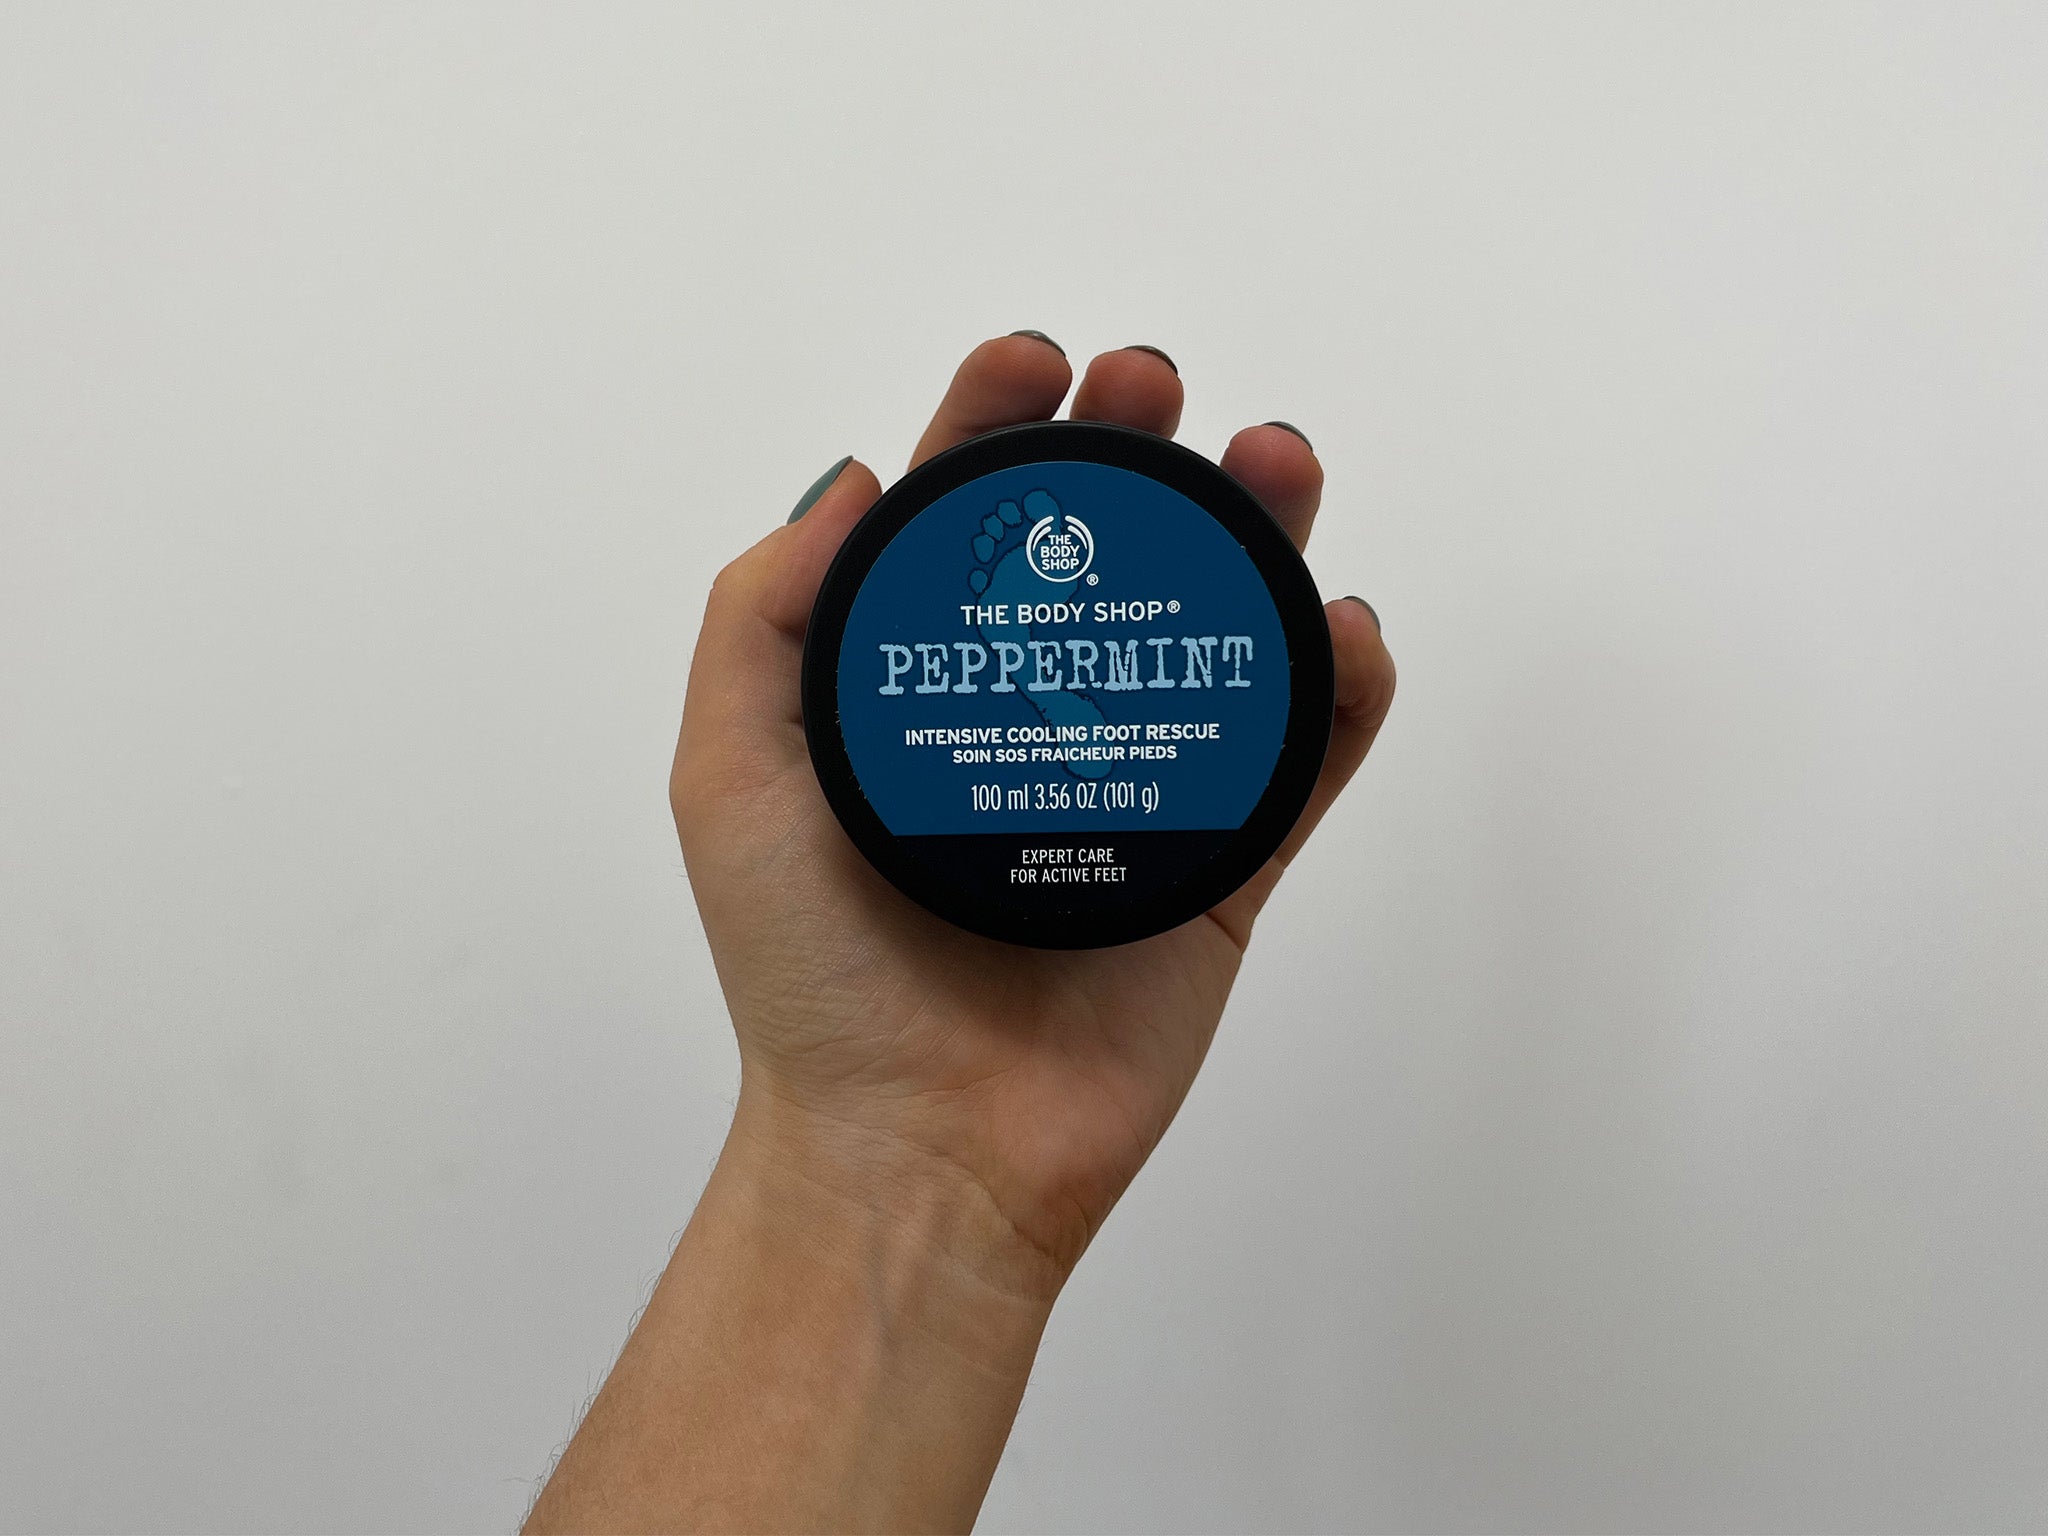 The Body Shop peppermint intensive cooling foot rescue